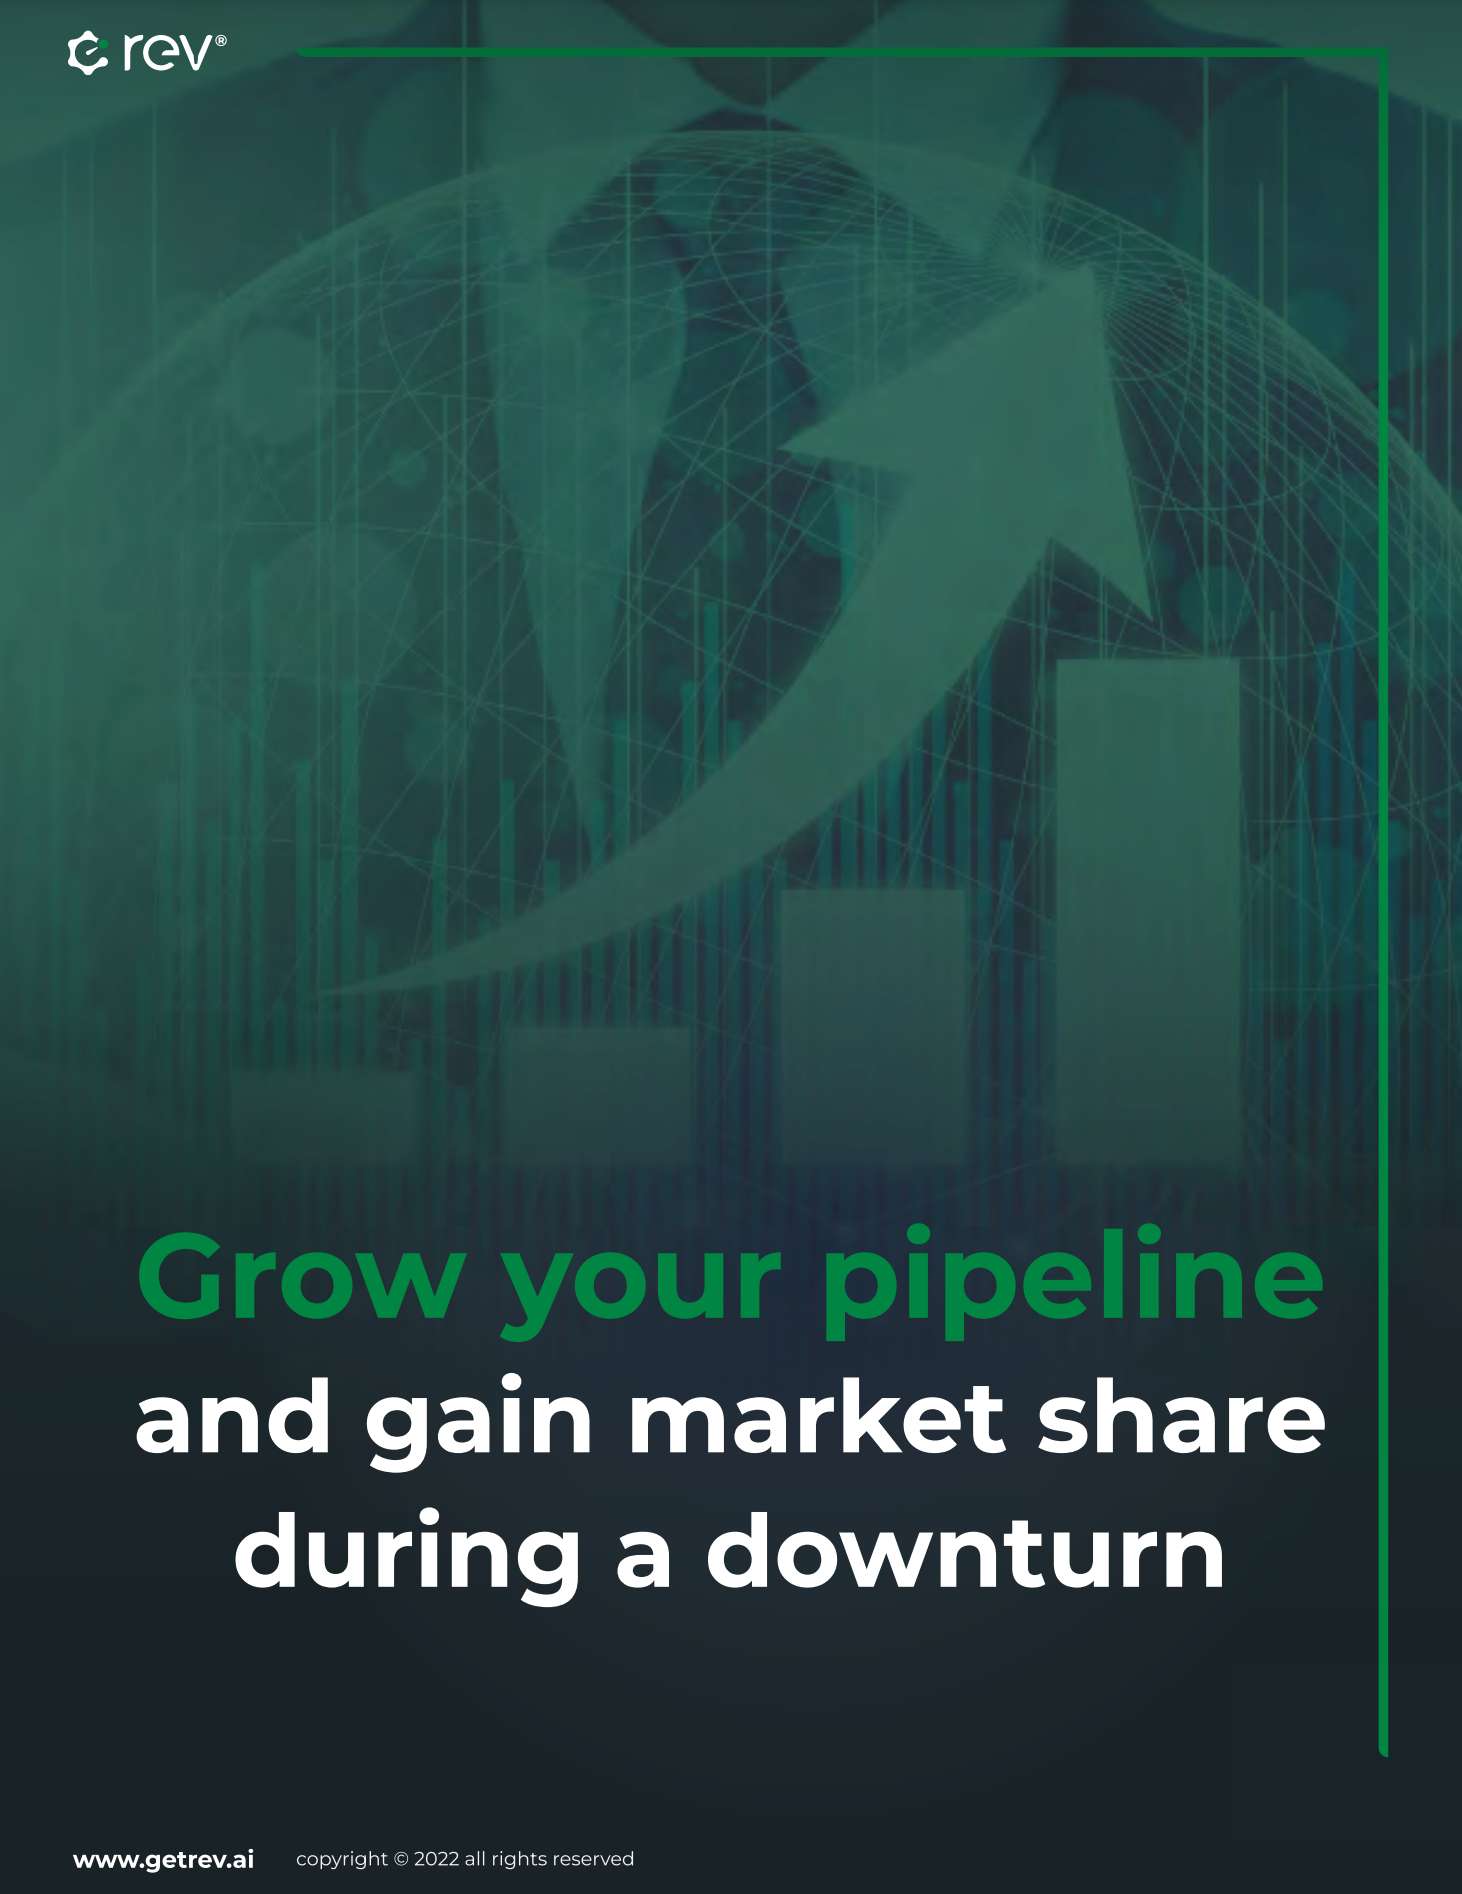 Grow your pipeline and gain market share during a downturn